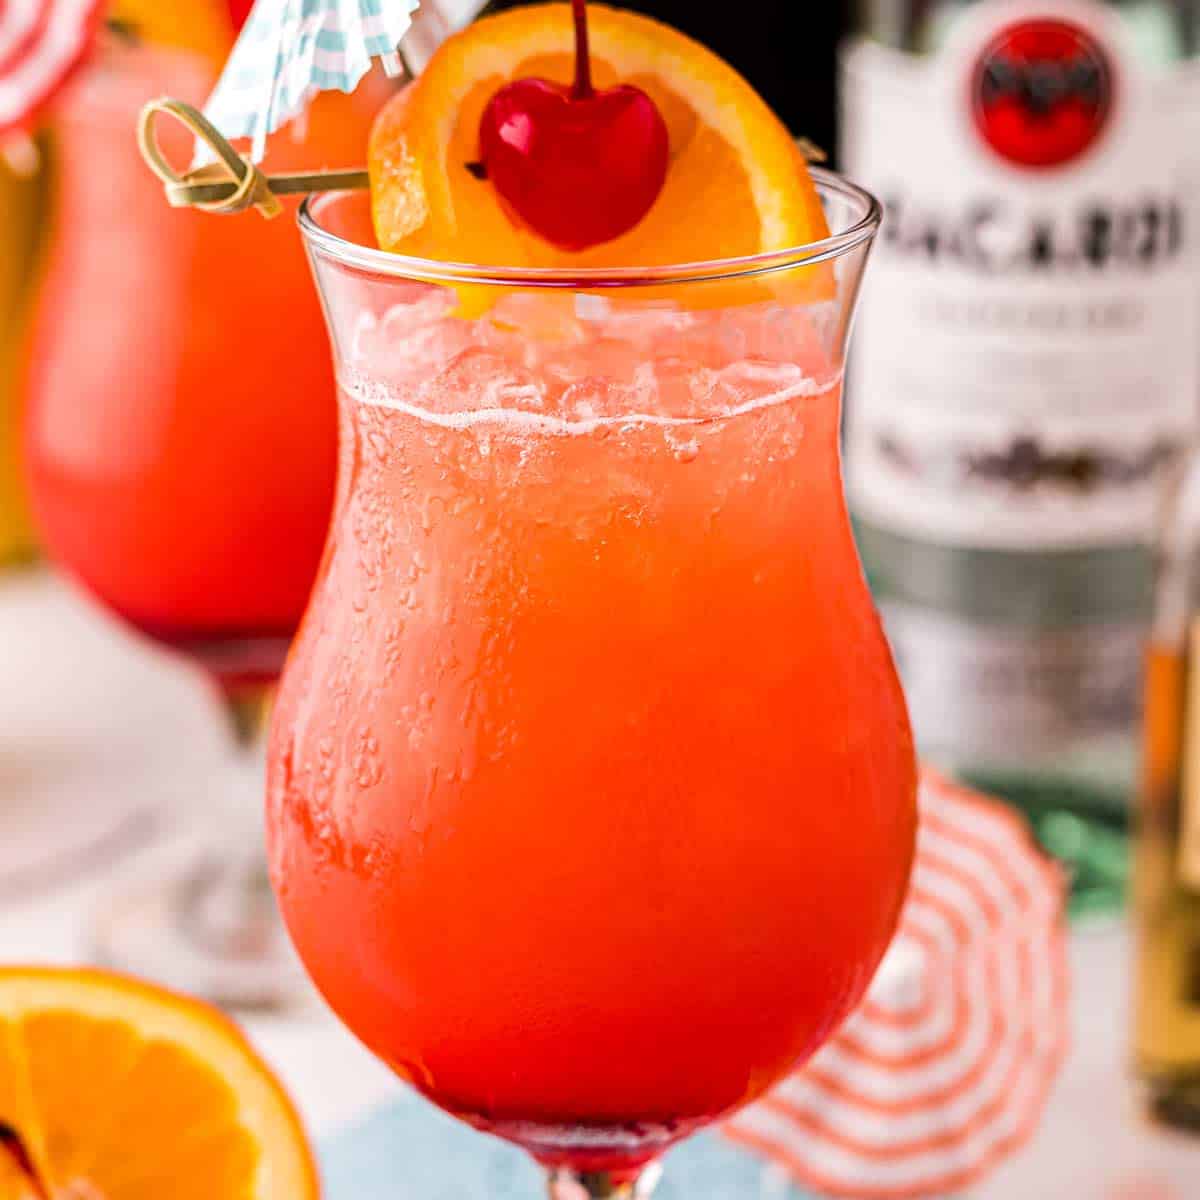 Drinks Best Served in a Hurricane Glass